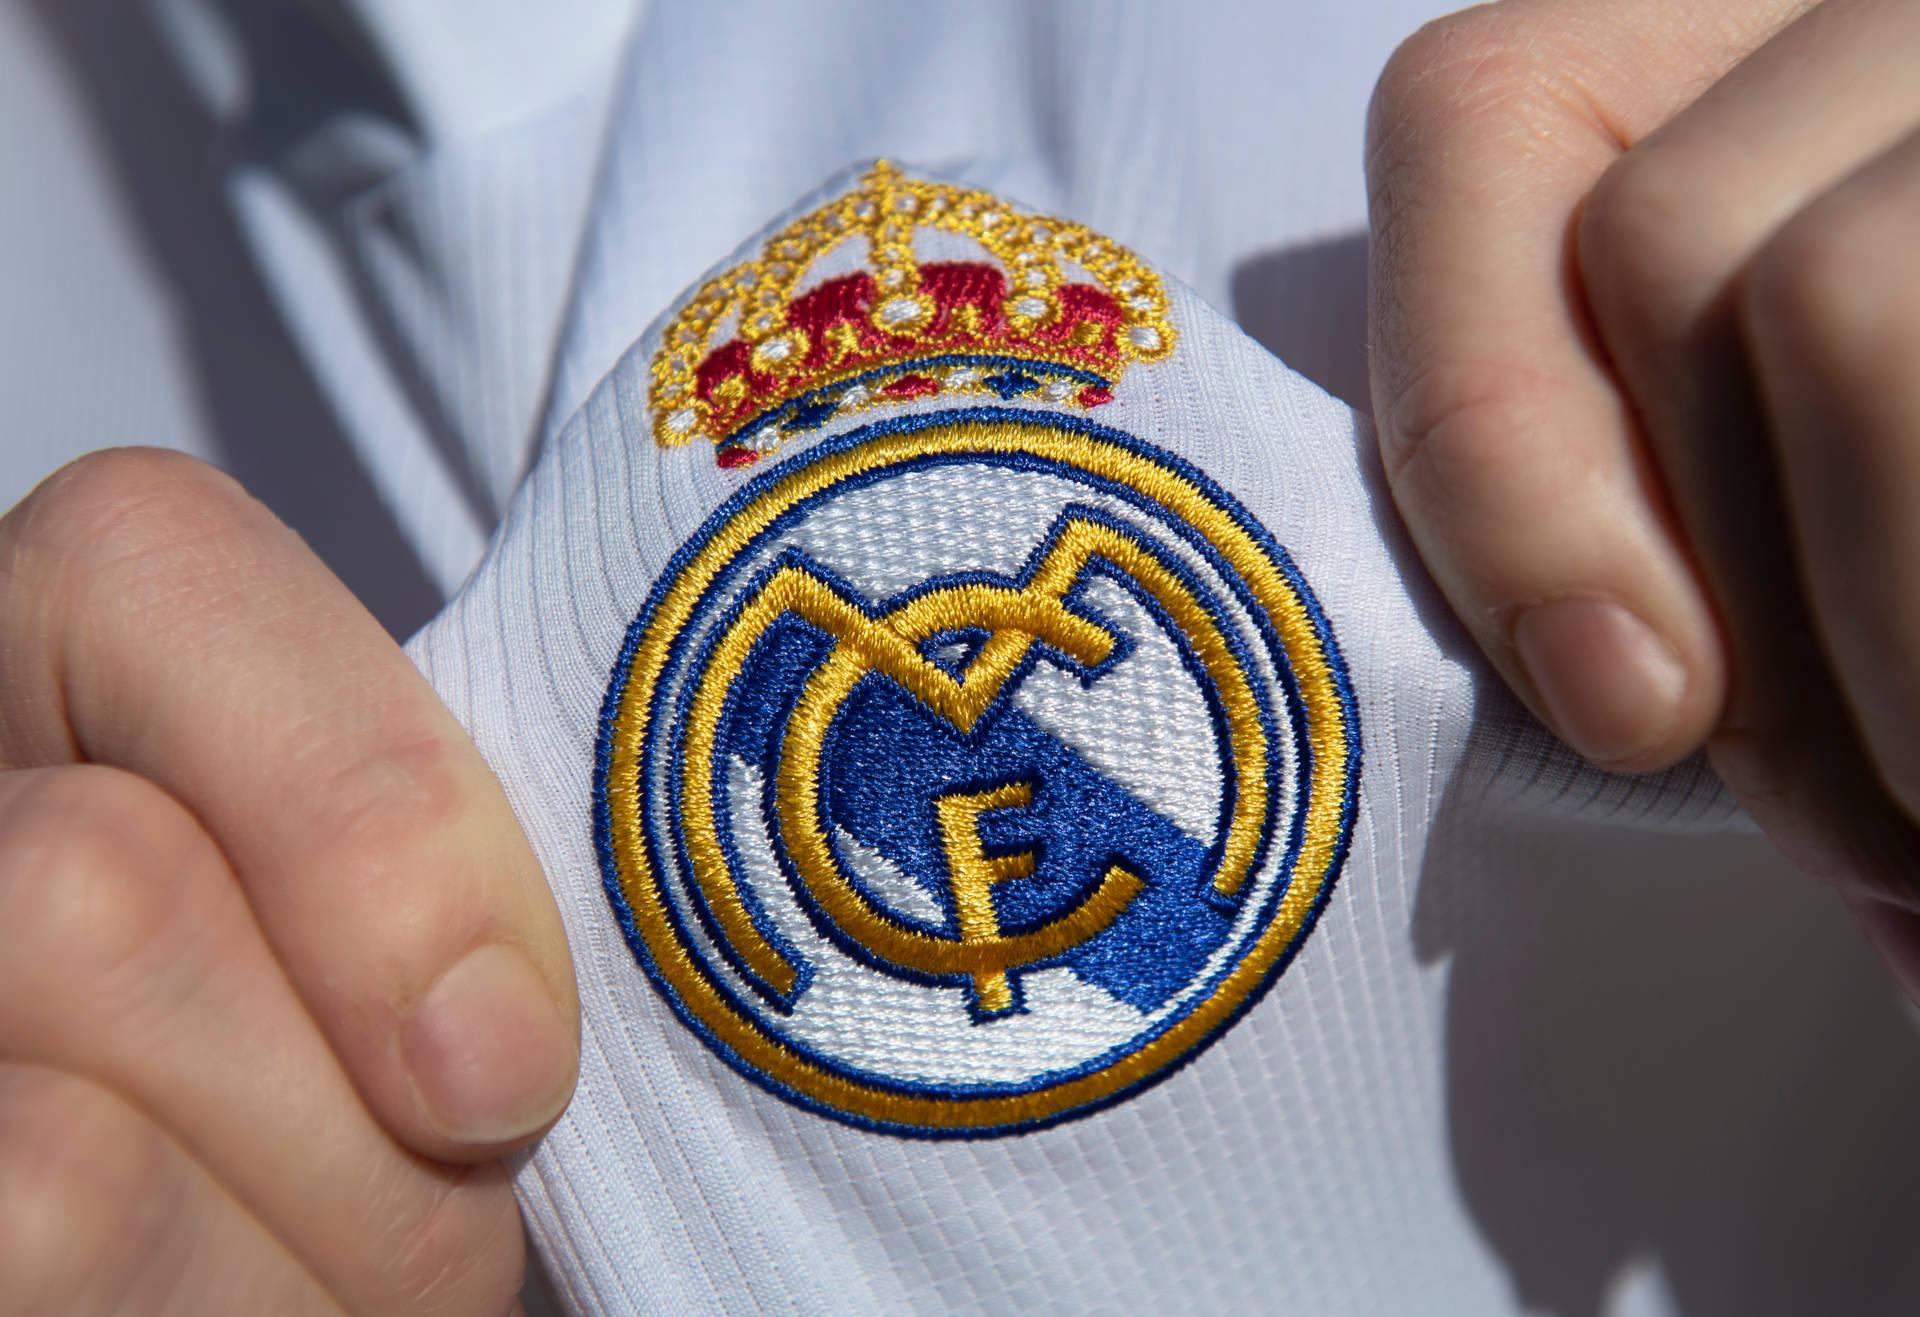 Real Madrid 4k Patch Wallpaper